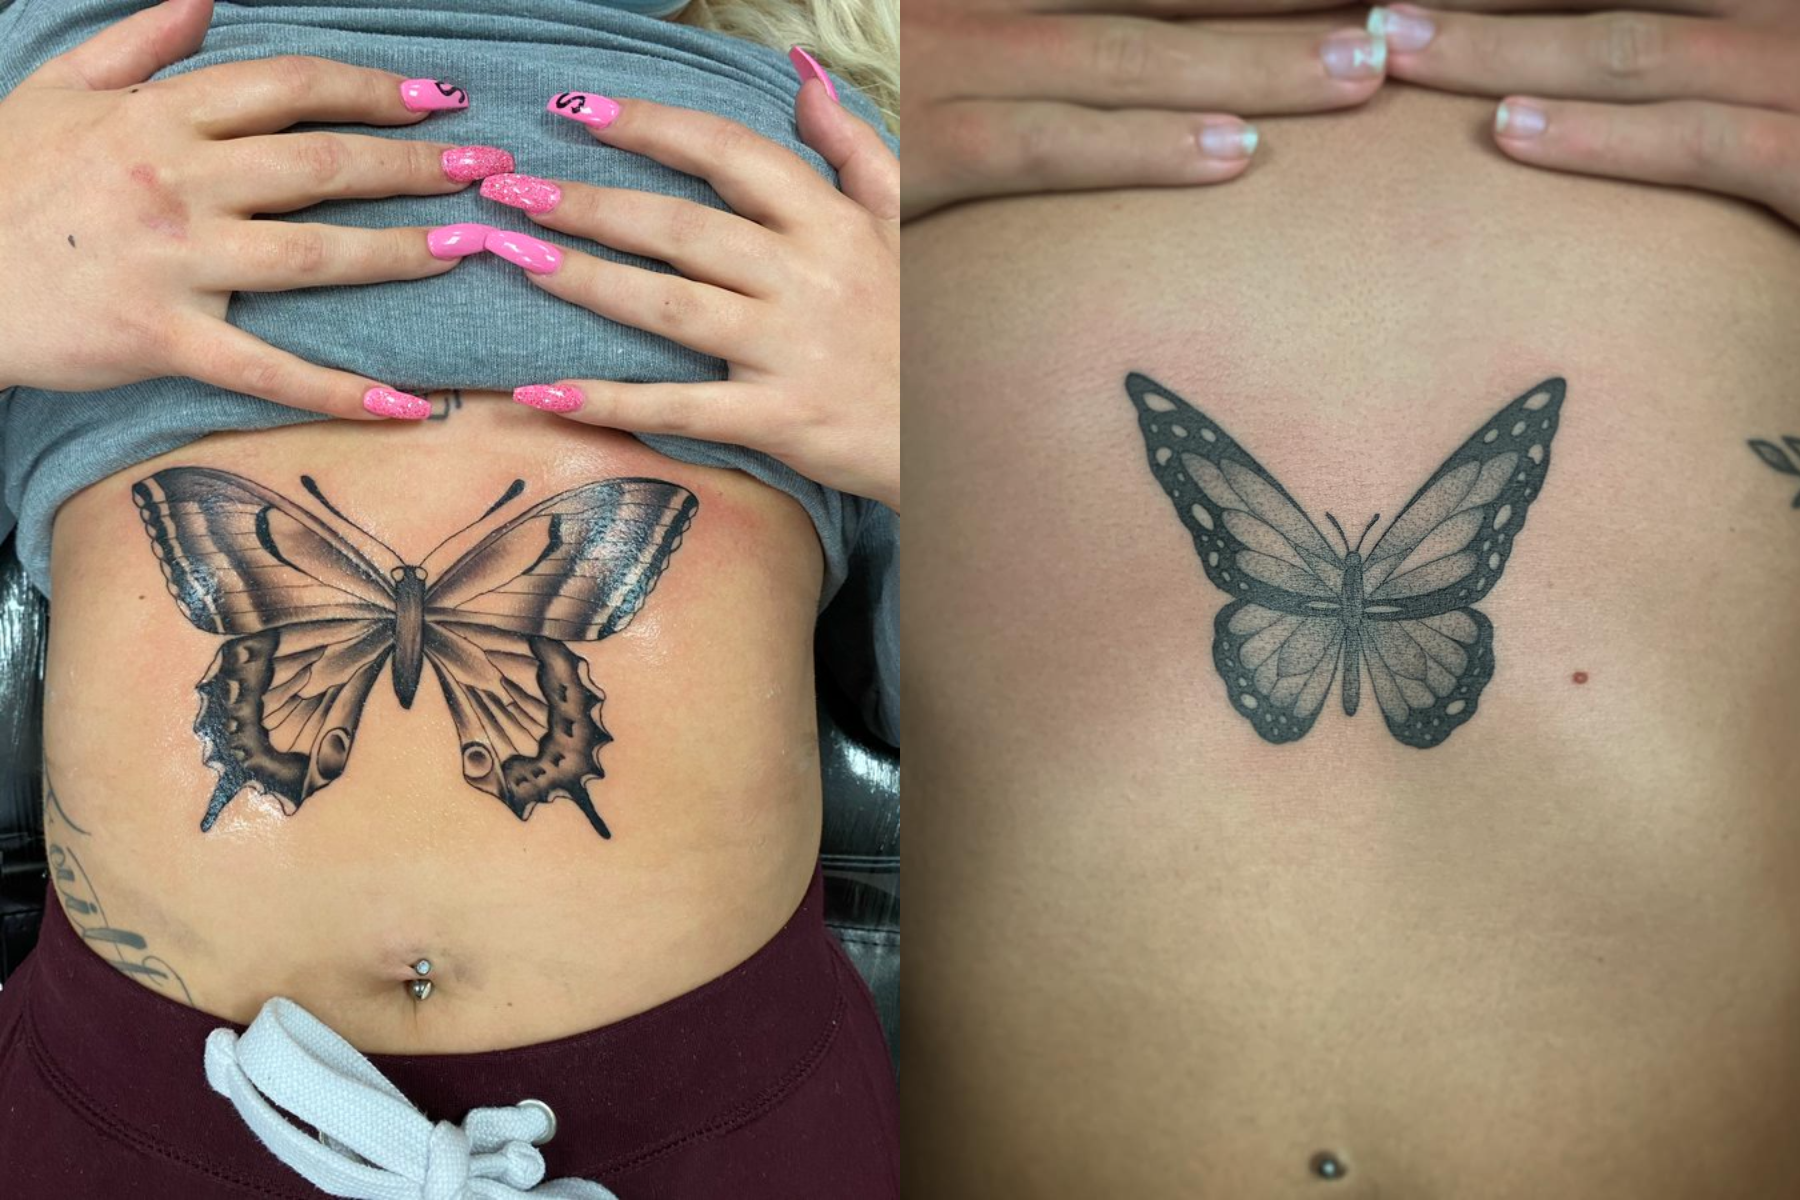 Two ladies with black butterfly tattoos